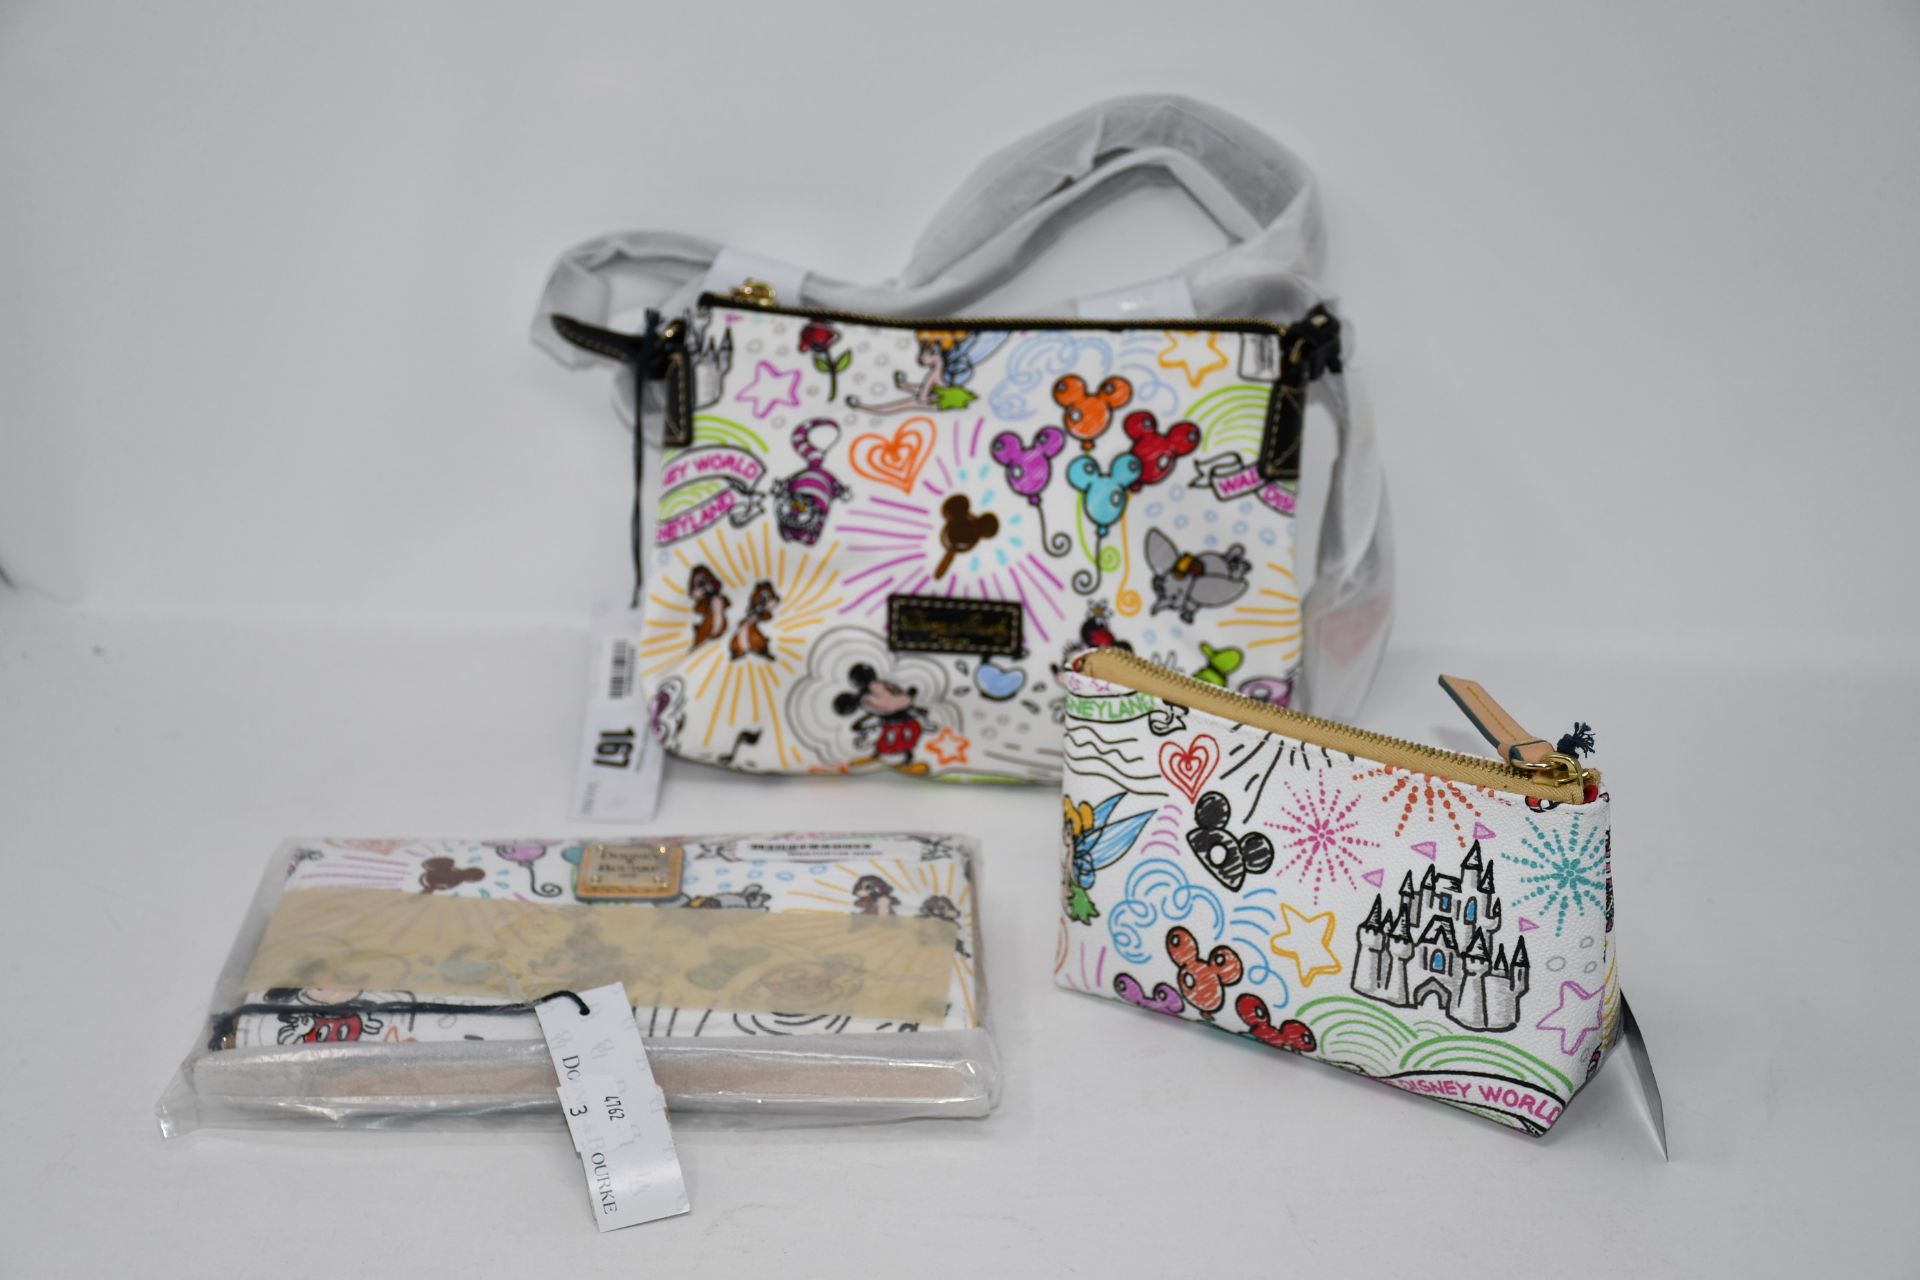 An as new Dooney & Bourke wallet from the Disney collection, An as new Dooney & Bourke cosmetics bag